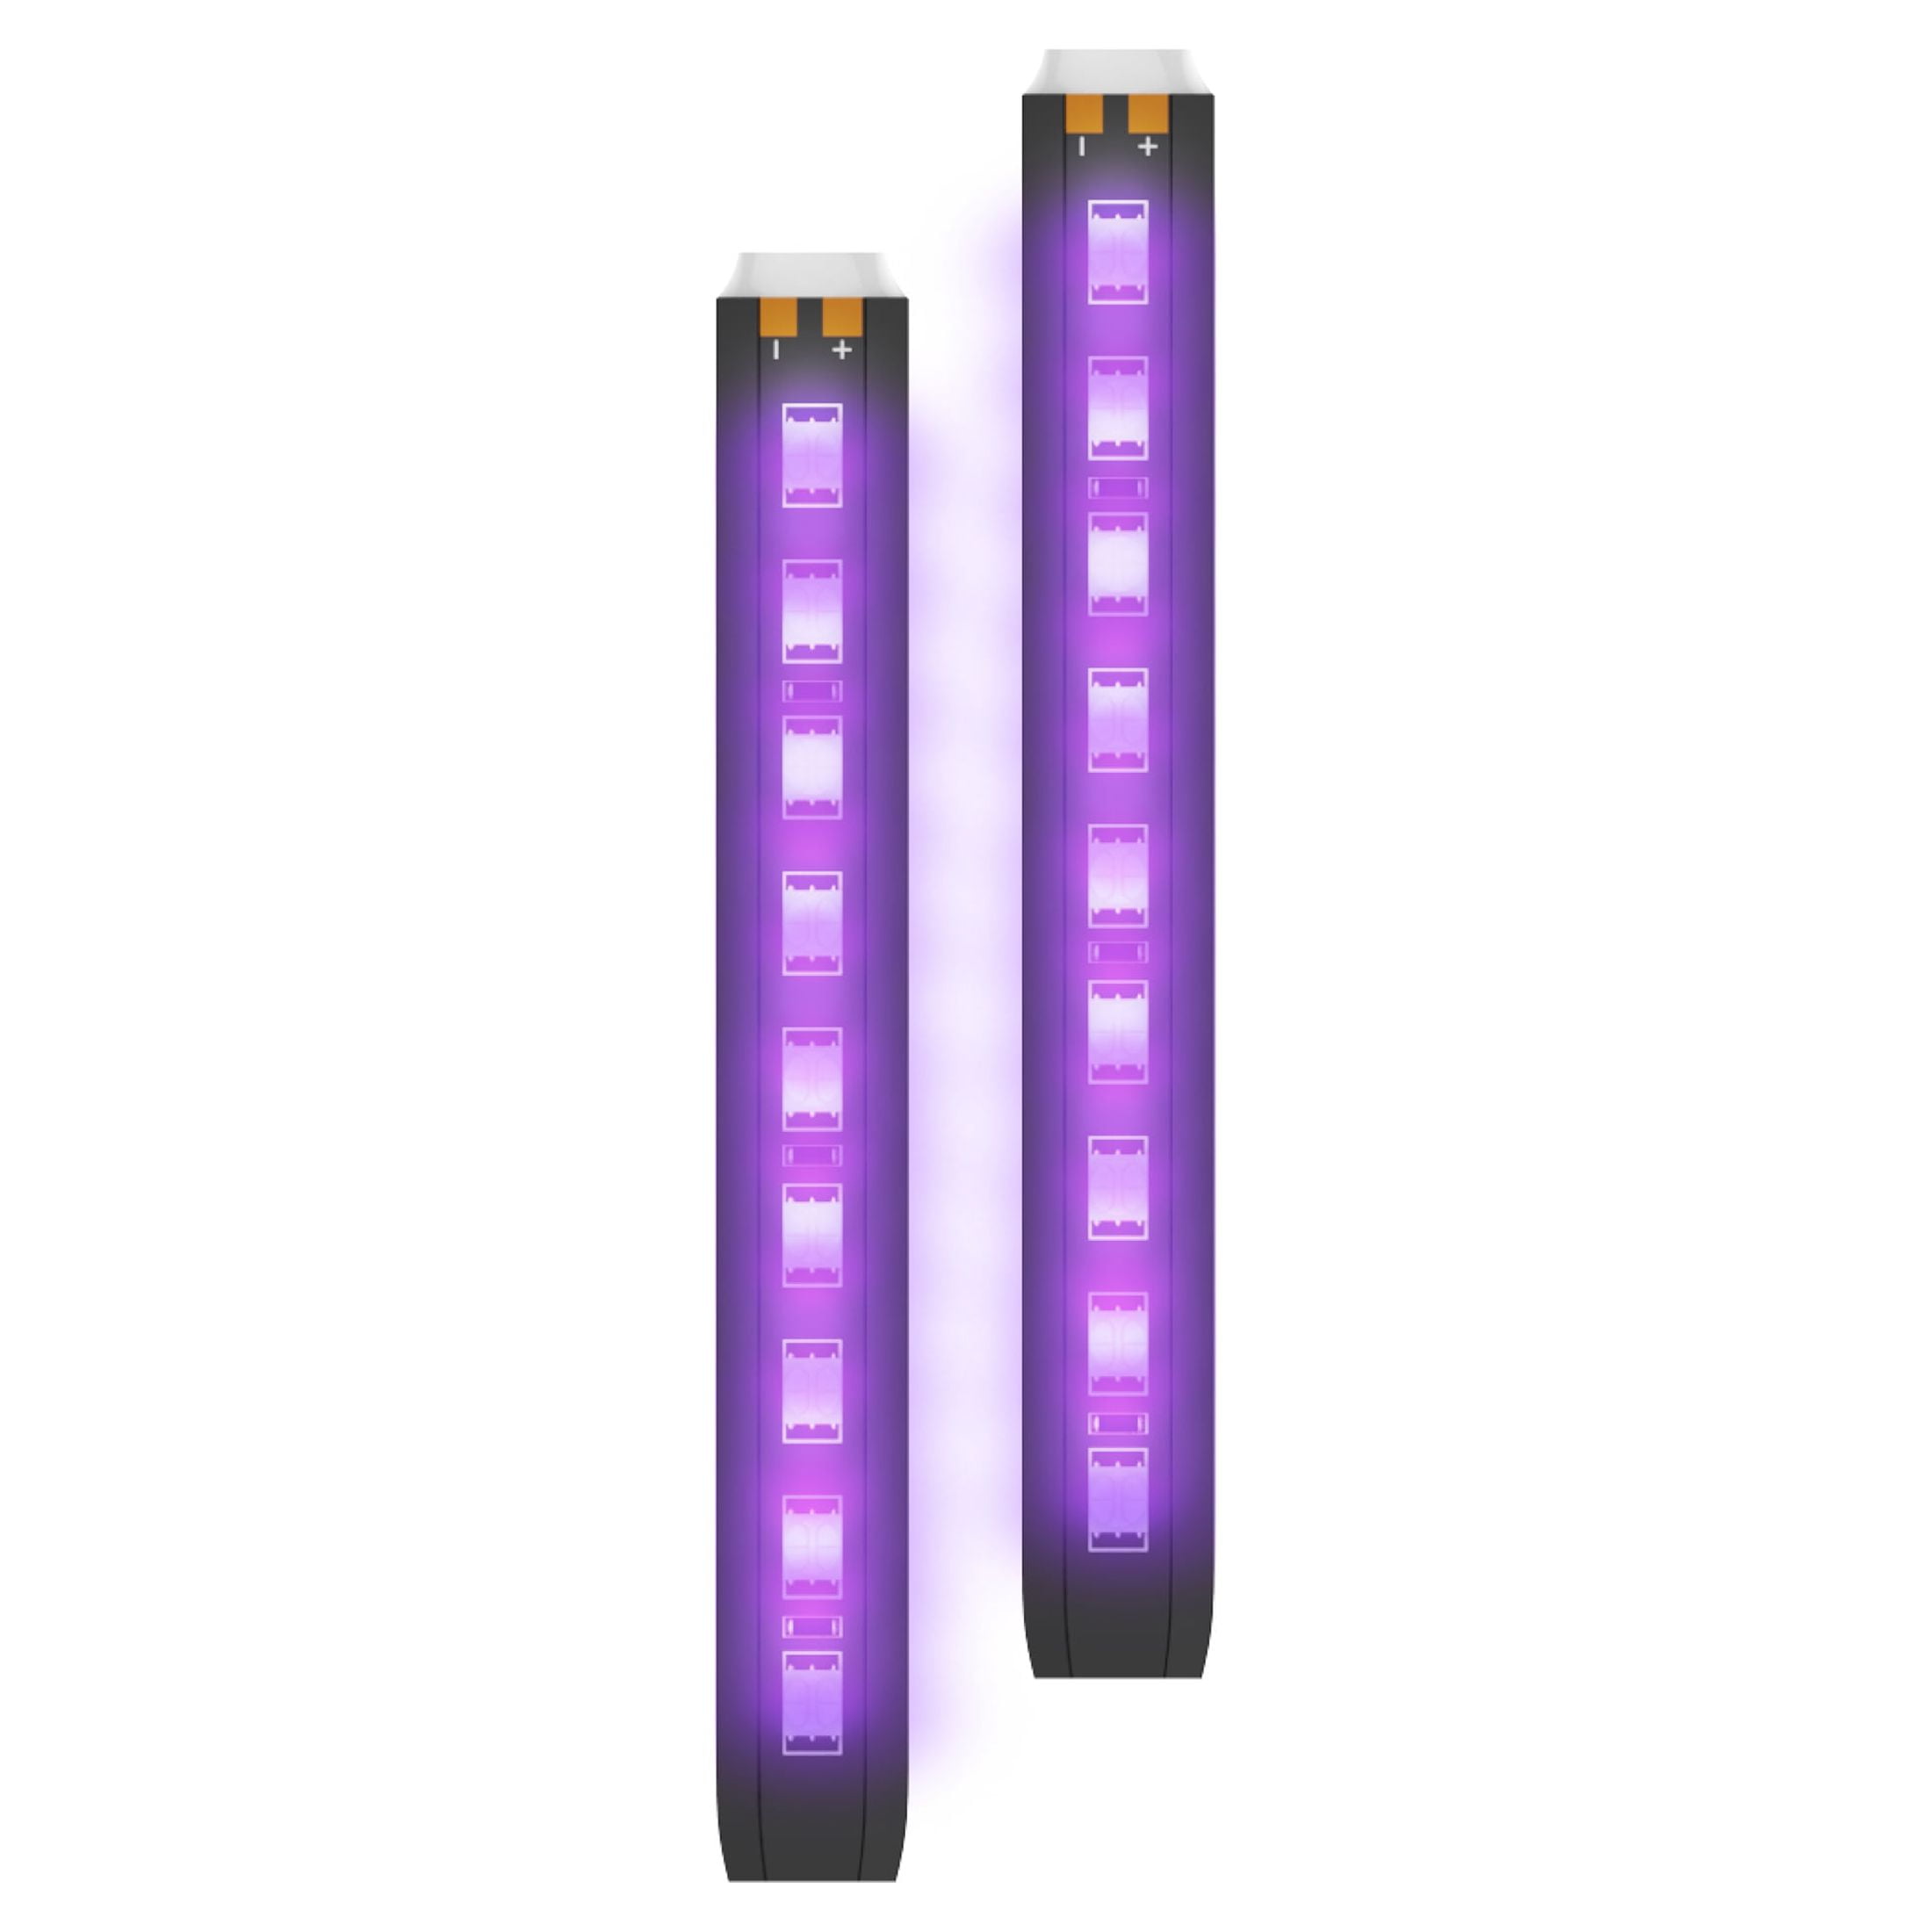 Ledeez LED Light Bar 2 Pack, Blue, 5 inch Bars, USB Powered 65 inch Cable,  Stick on Adhesive Included 